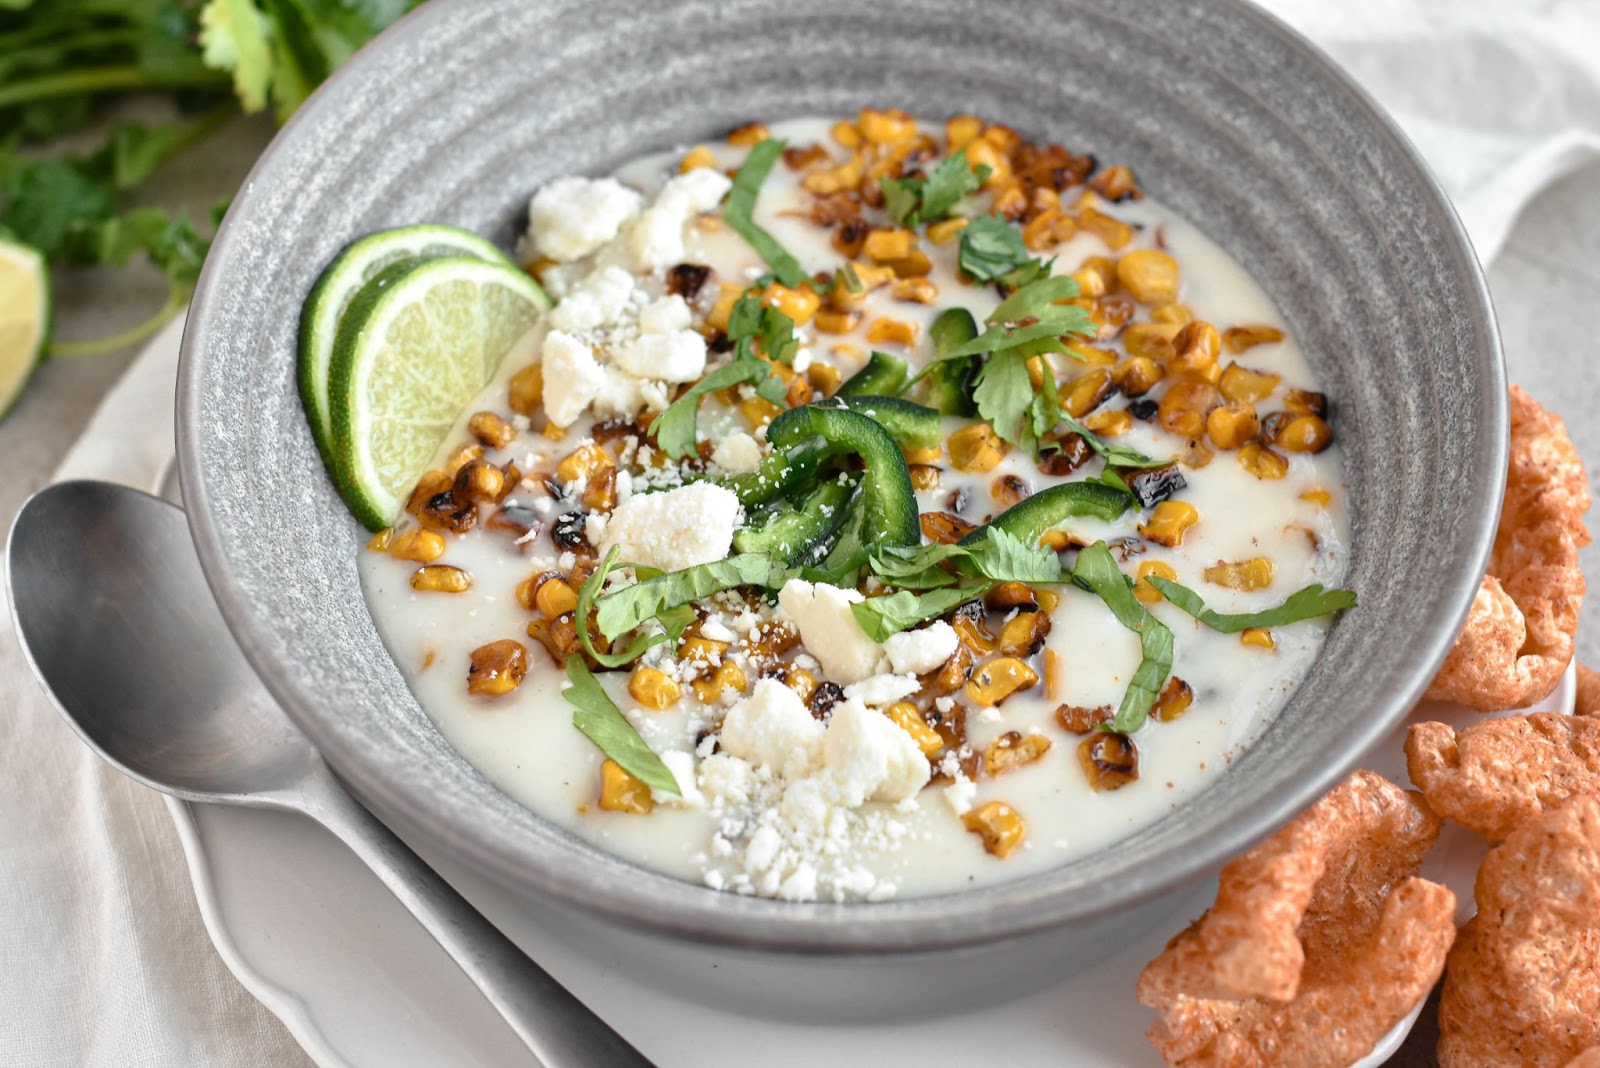 A bowl of creamy queso topped with roasted corn, sliced limes, cilantro, cheese crumbles, and jalapeño slices, accompanied by crispy pork rinds on the side